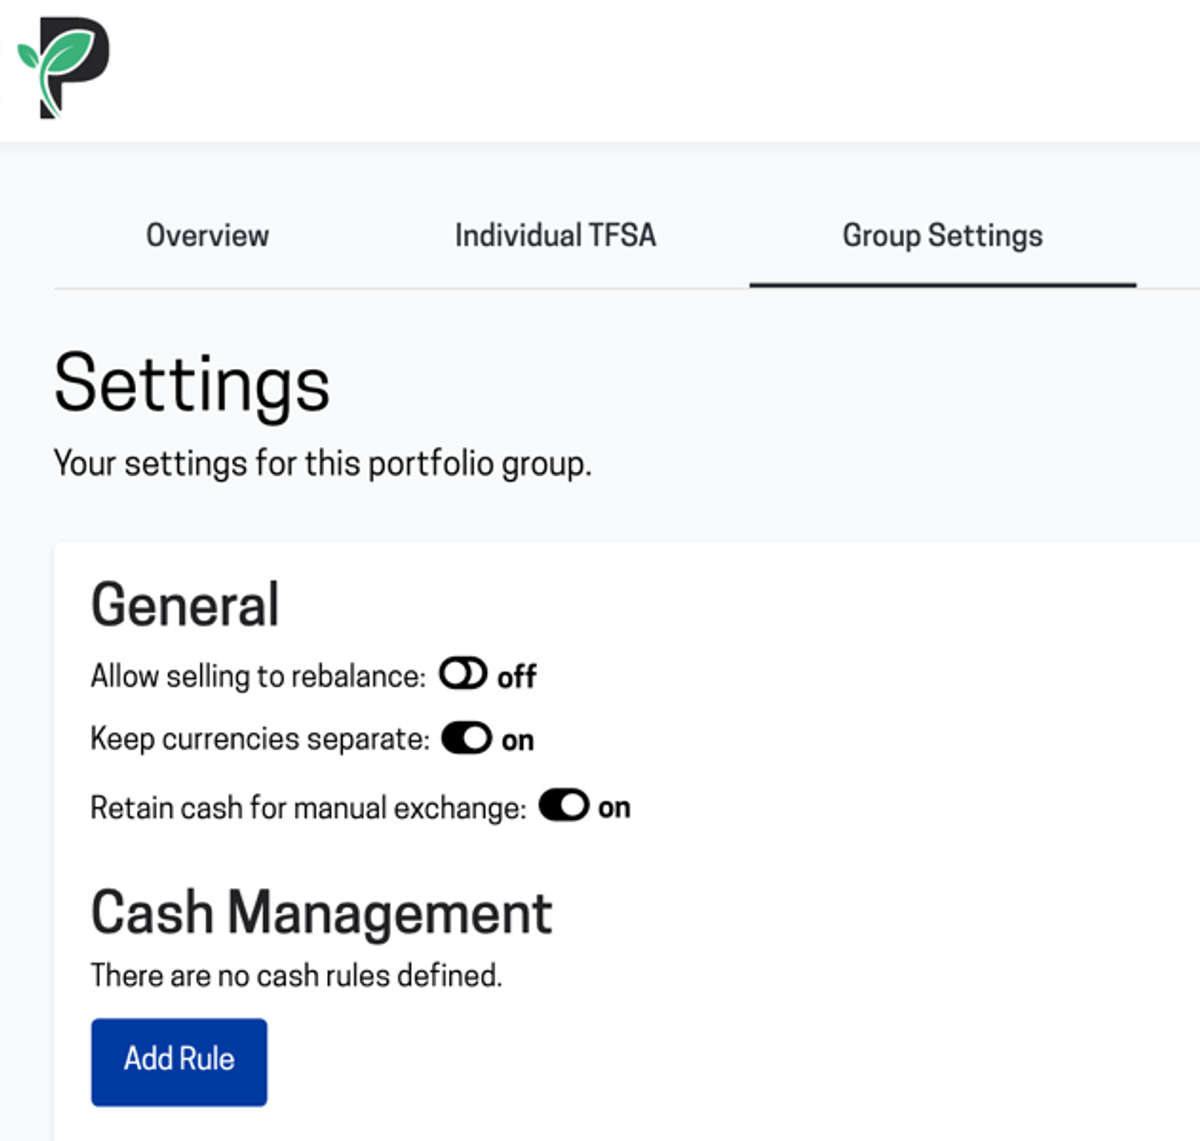 An image displaying where a Passiv user can apply Cash Management rules